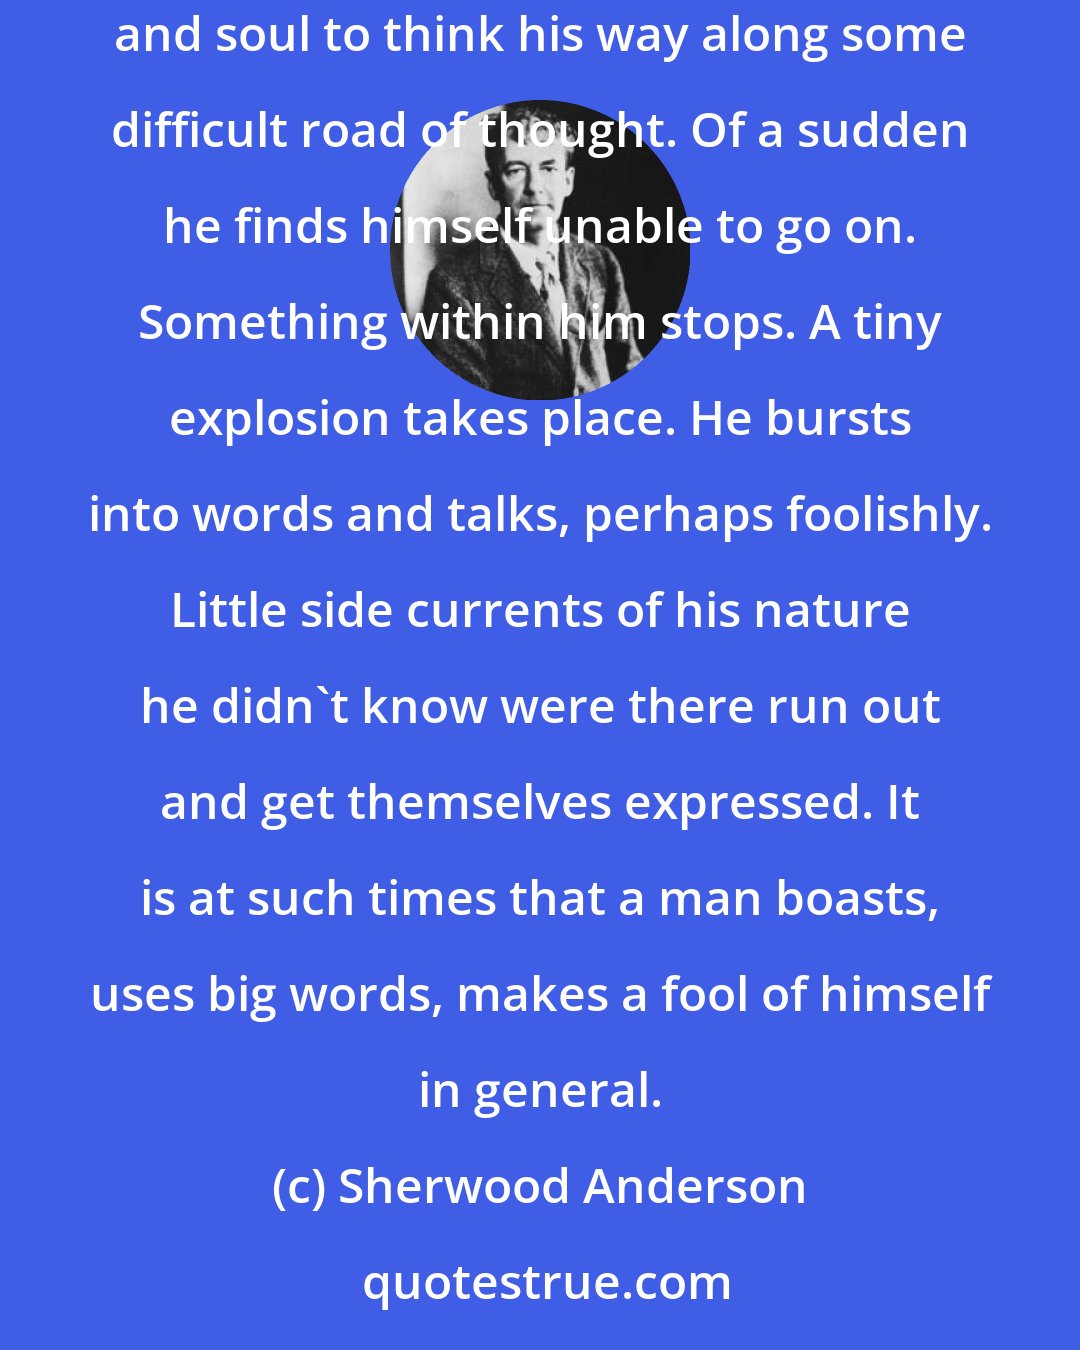 Sherwood Anderson: There is a note that comes into the human voice by which you may know real weariness. It comes when one has been trying with all his heart and soul to think his way along some difficult road of thought. Of a sudden he finds himself unable to go on. Something within him stops. A tiny explosion takes place. He bursts into words and talks, perhaps foolishly. Little side currents of his nature he didn't know were there run out and get themselves expressed. It is at such times that a man boasts, uses big words, makes a fool of himself in general.